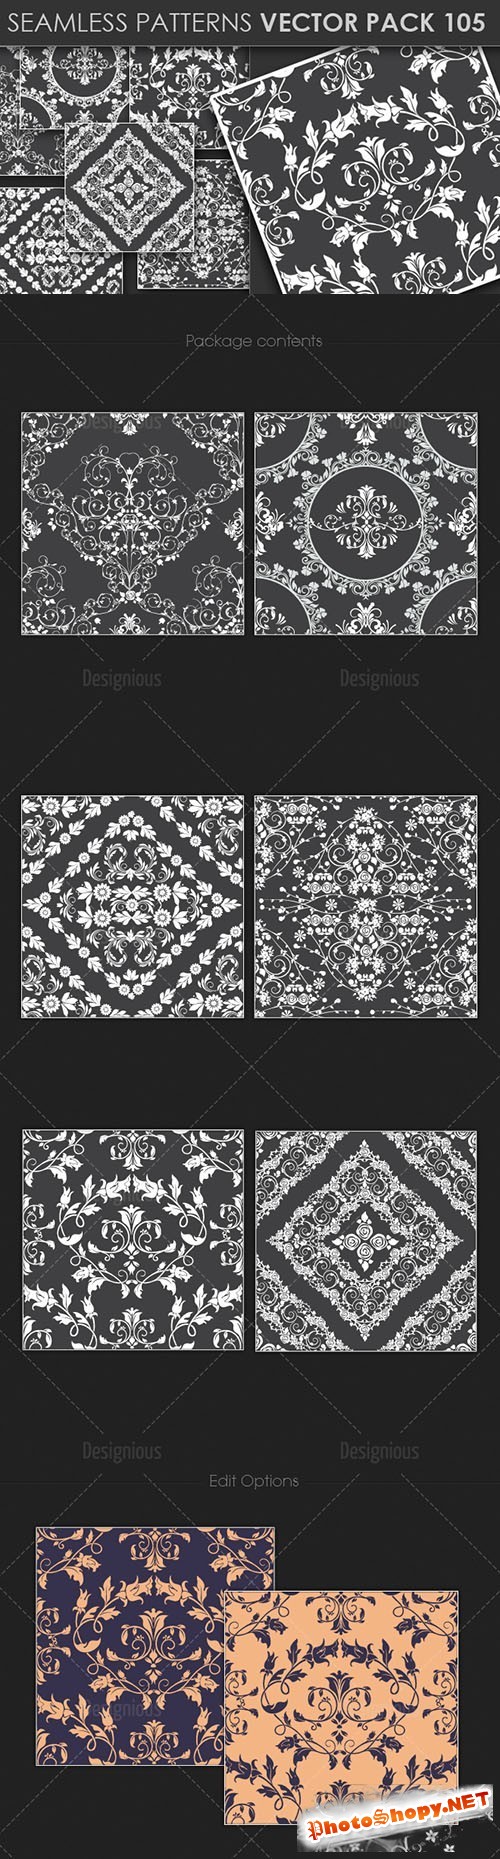 Seamless Patterns Vector Pack 105